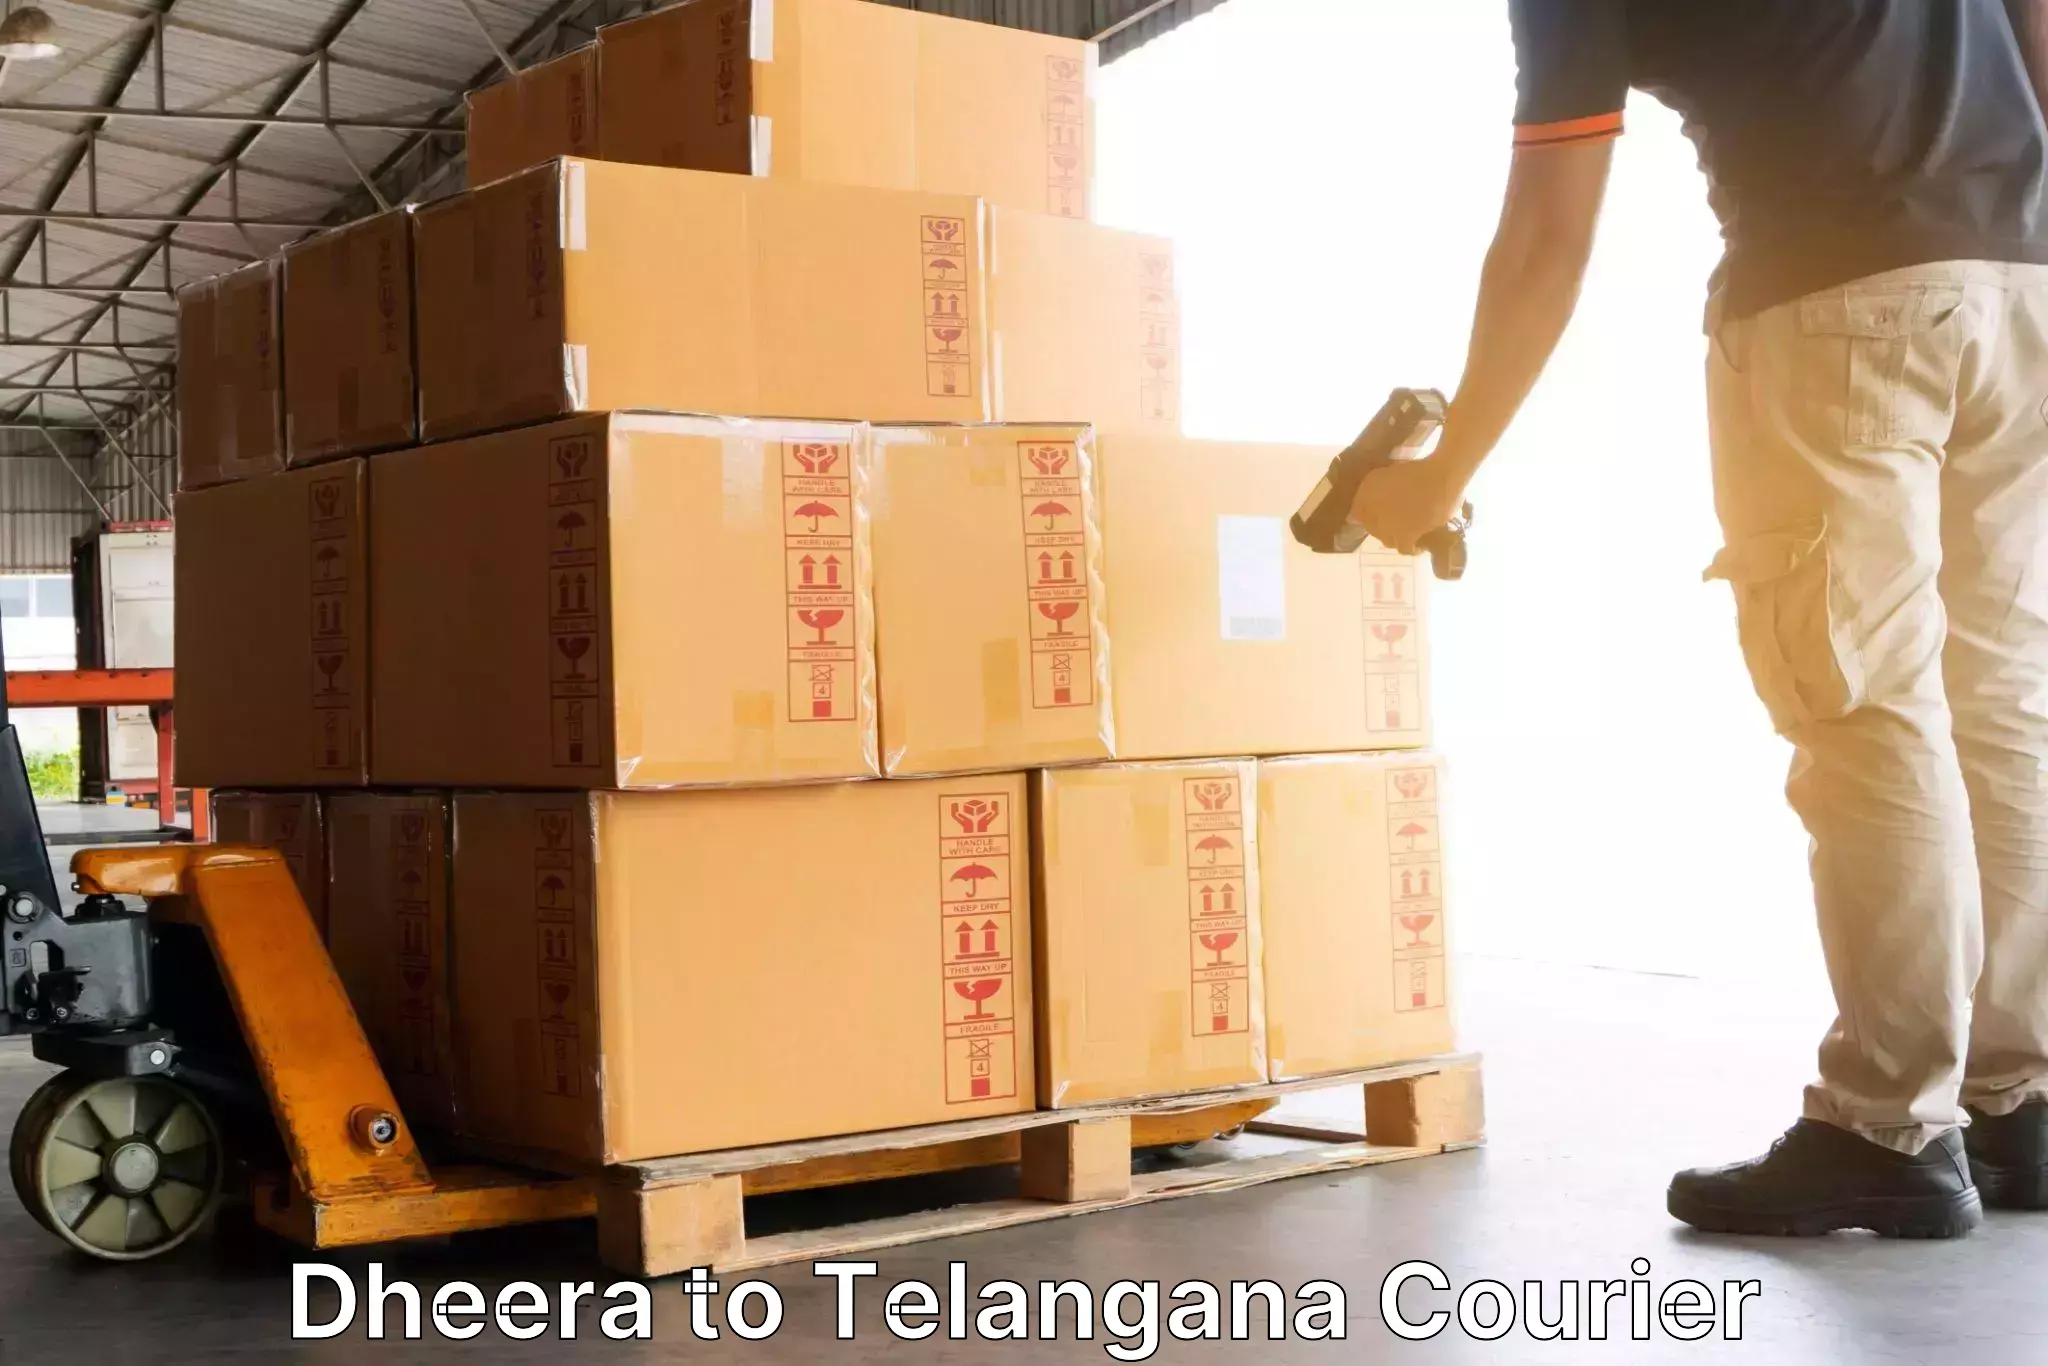 Tailored freight services Dheera to Ichoda